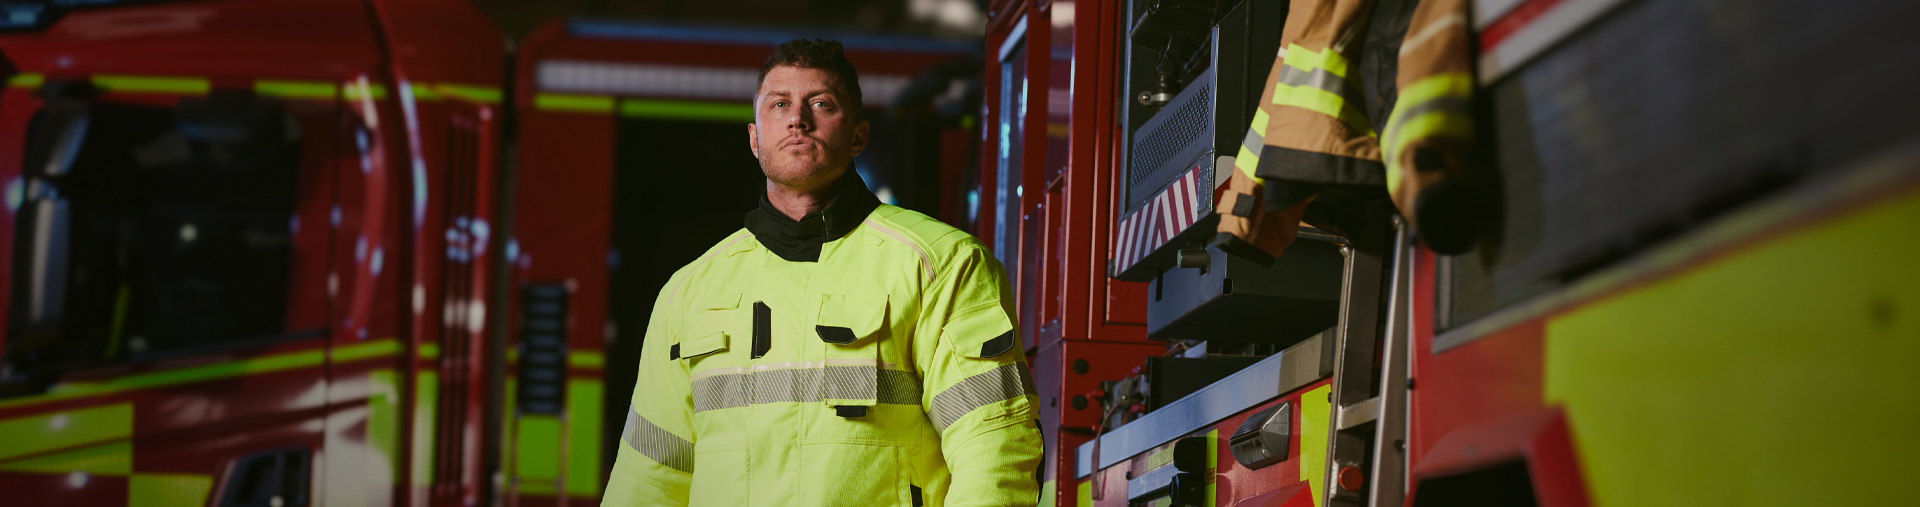 Firefighter stood in front of a firetruck Image - Landscape - 1920x507